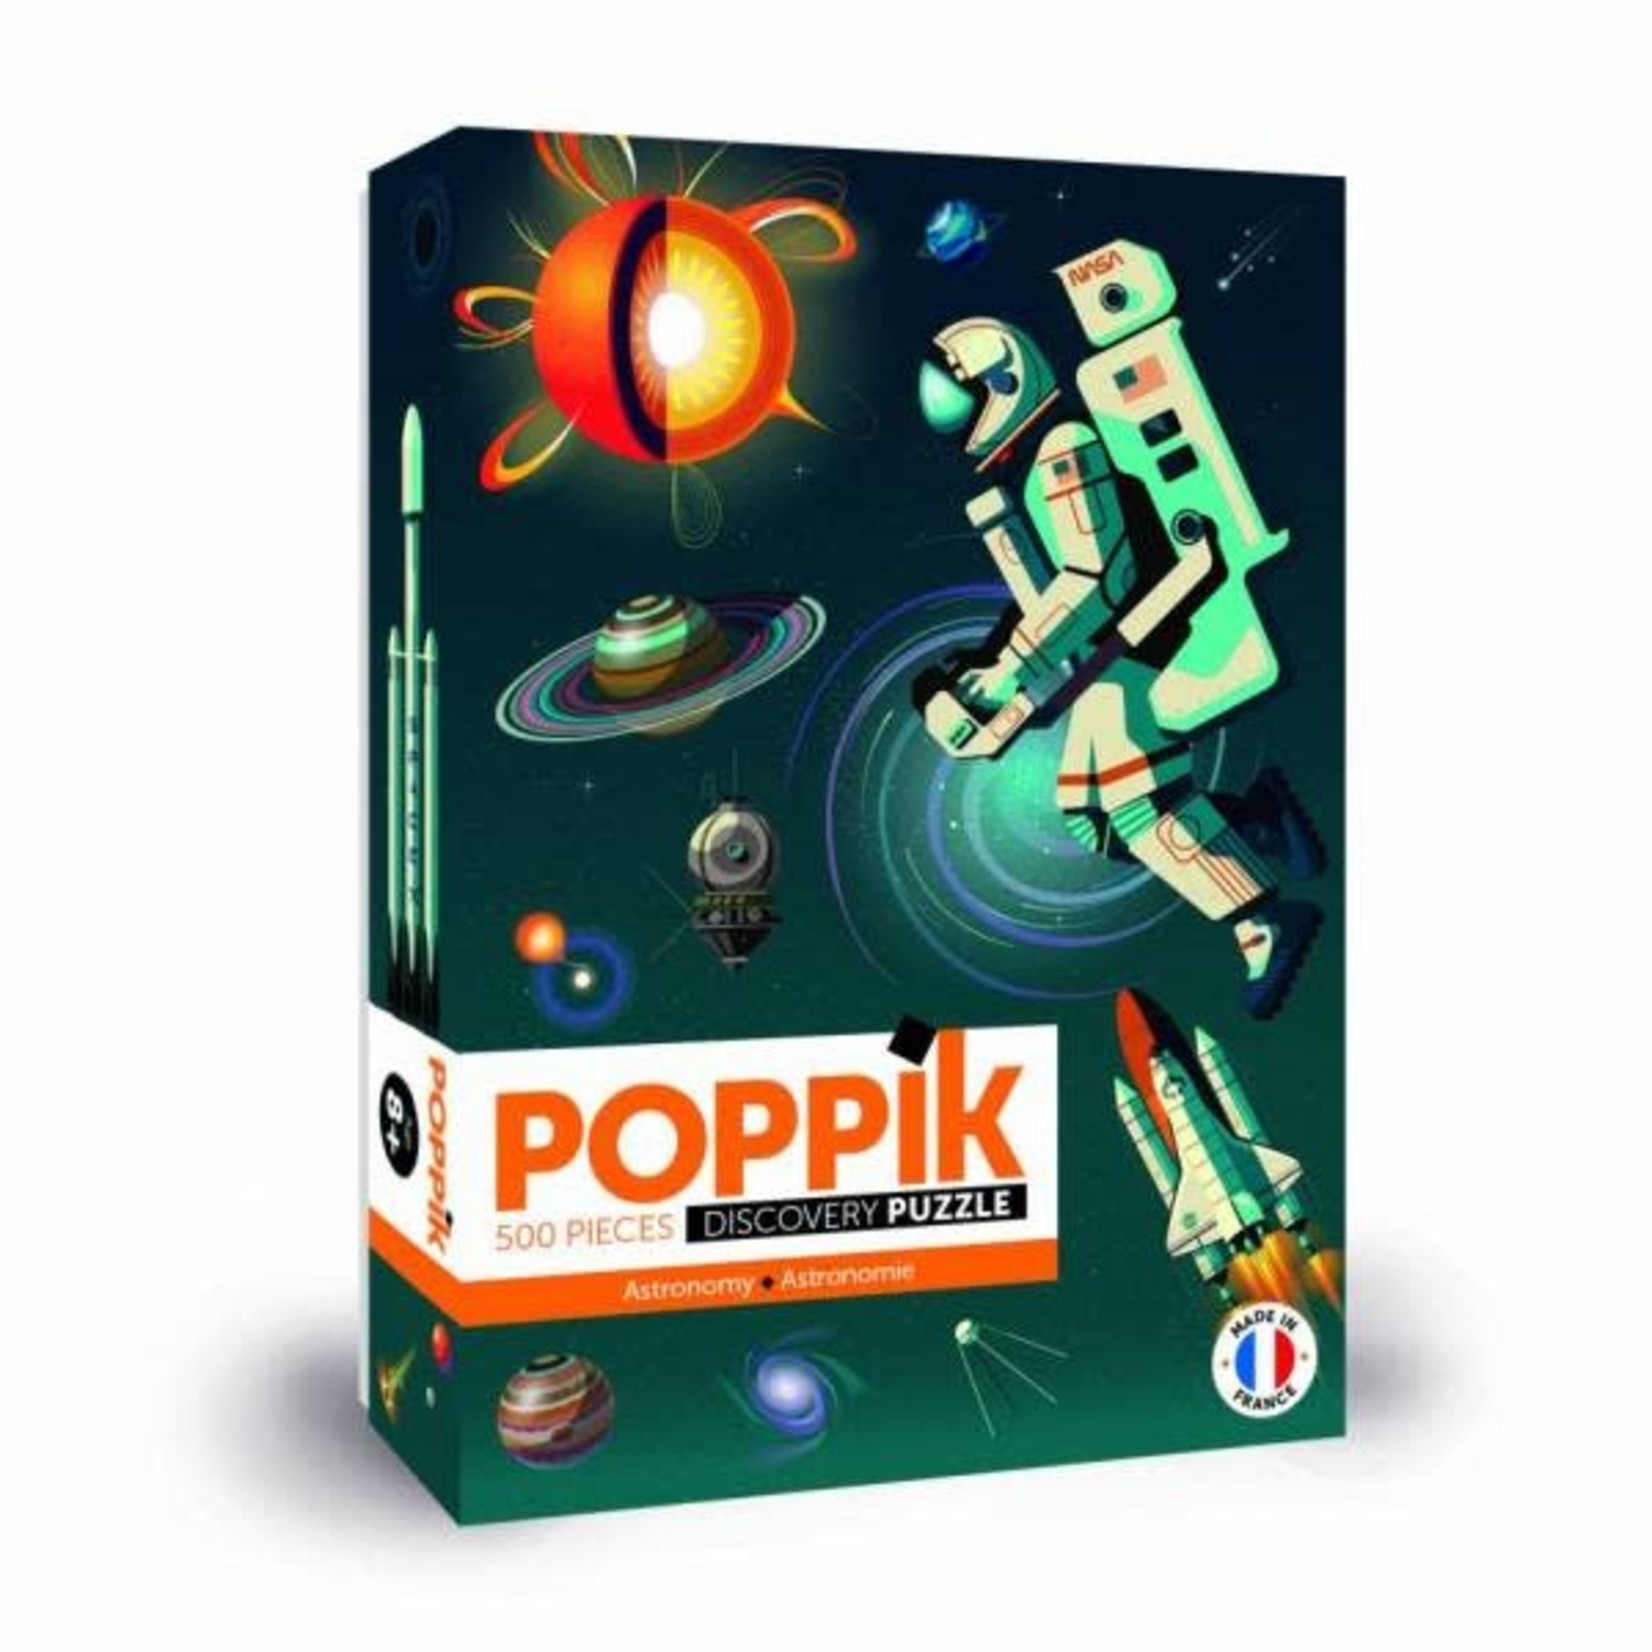 Poppik Astronomy 500 Piece Discovery Puzzle